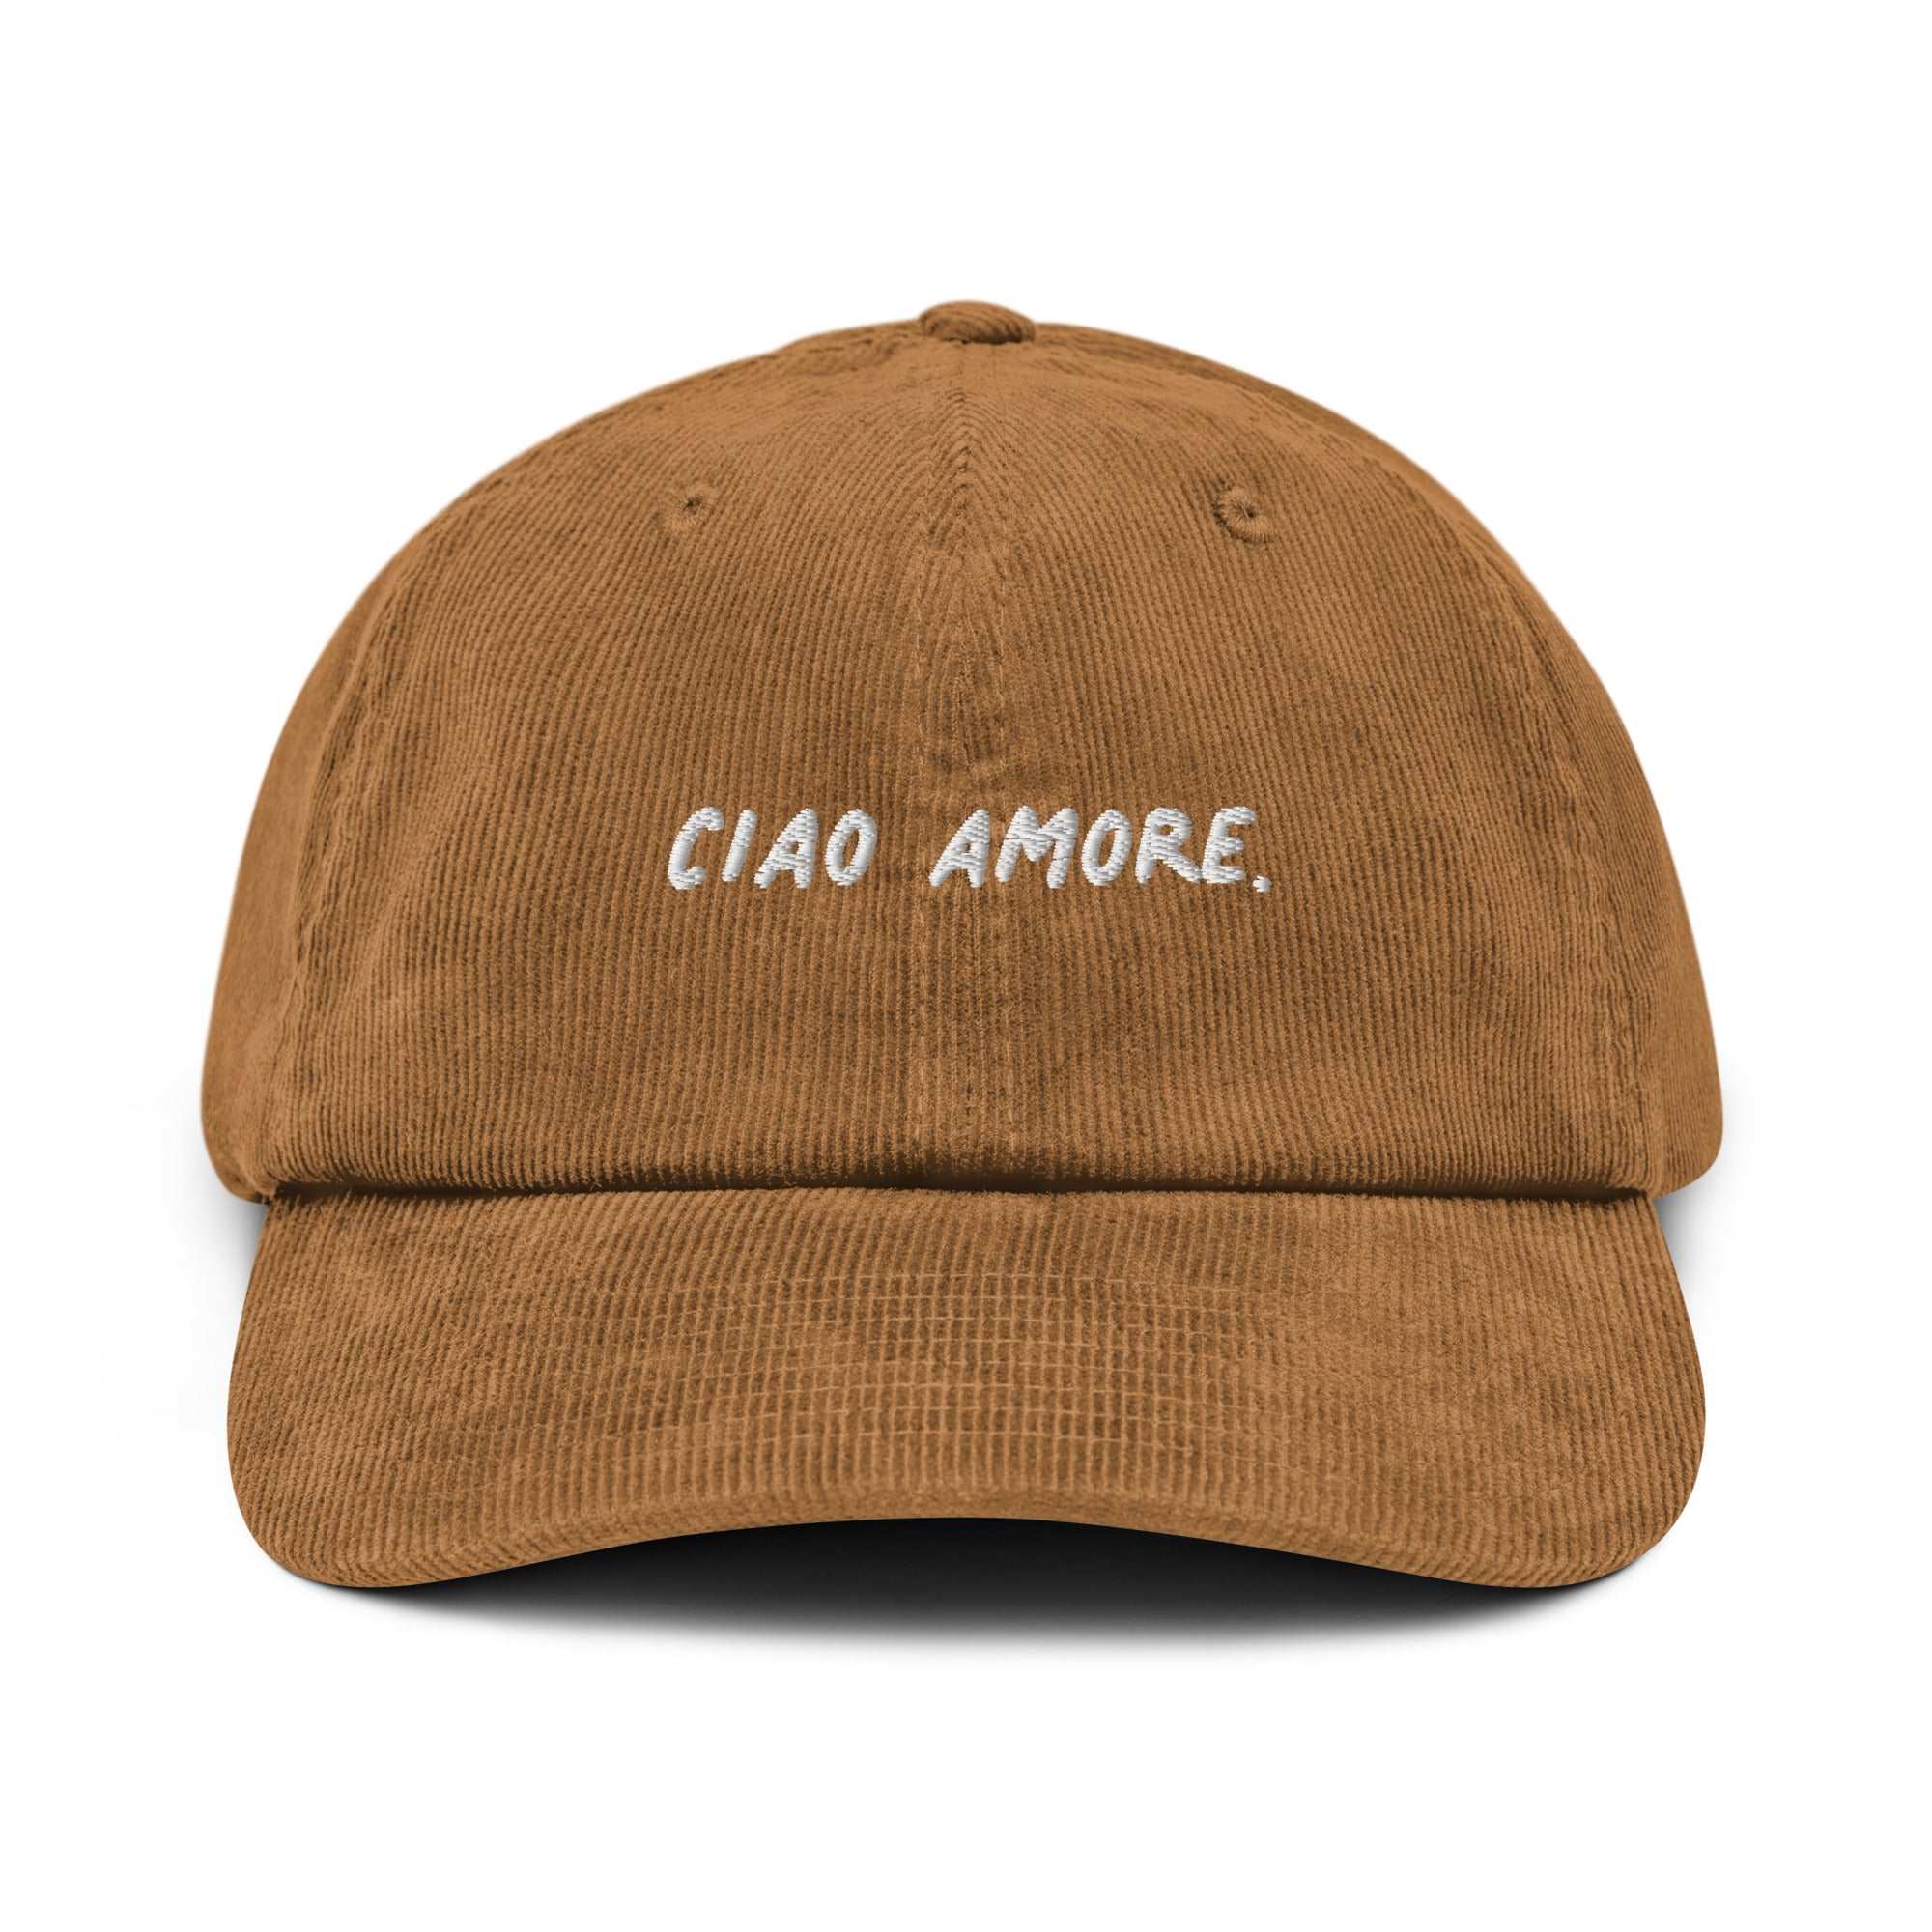 Ciao Amore. - Corduroy Cap - The Refined Spirit